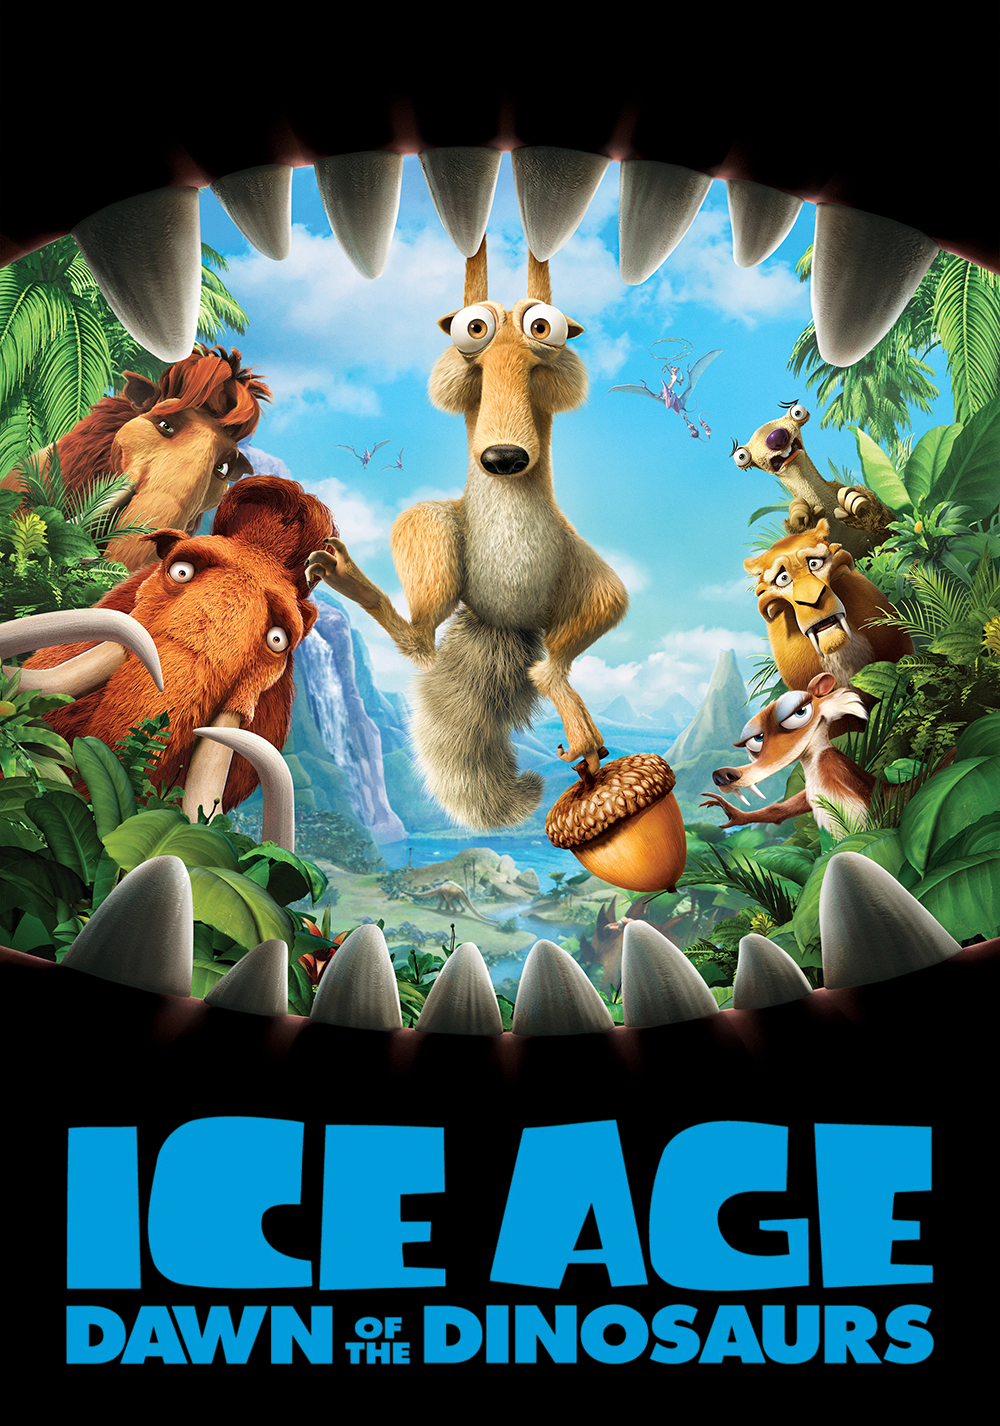 ice age 3 movie poster